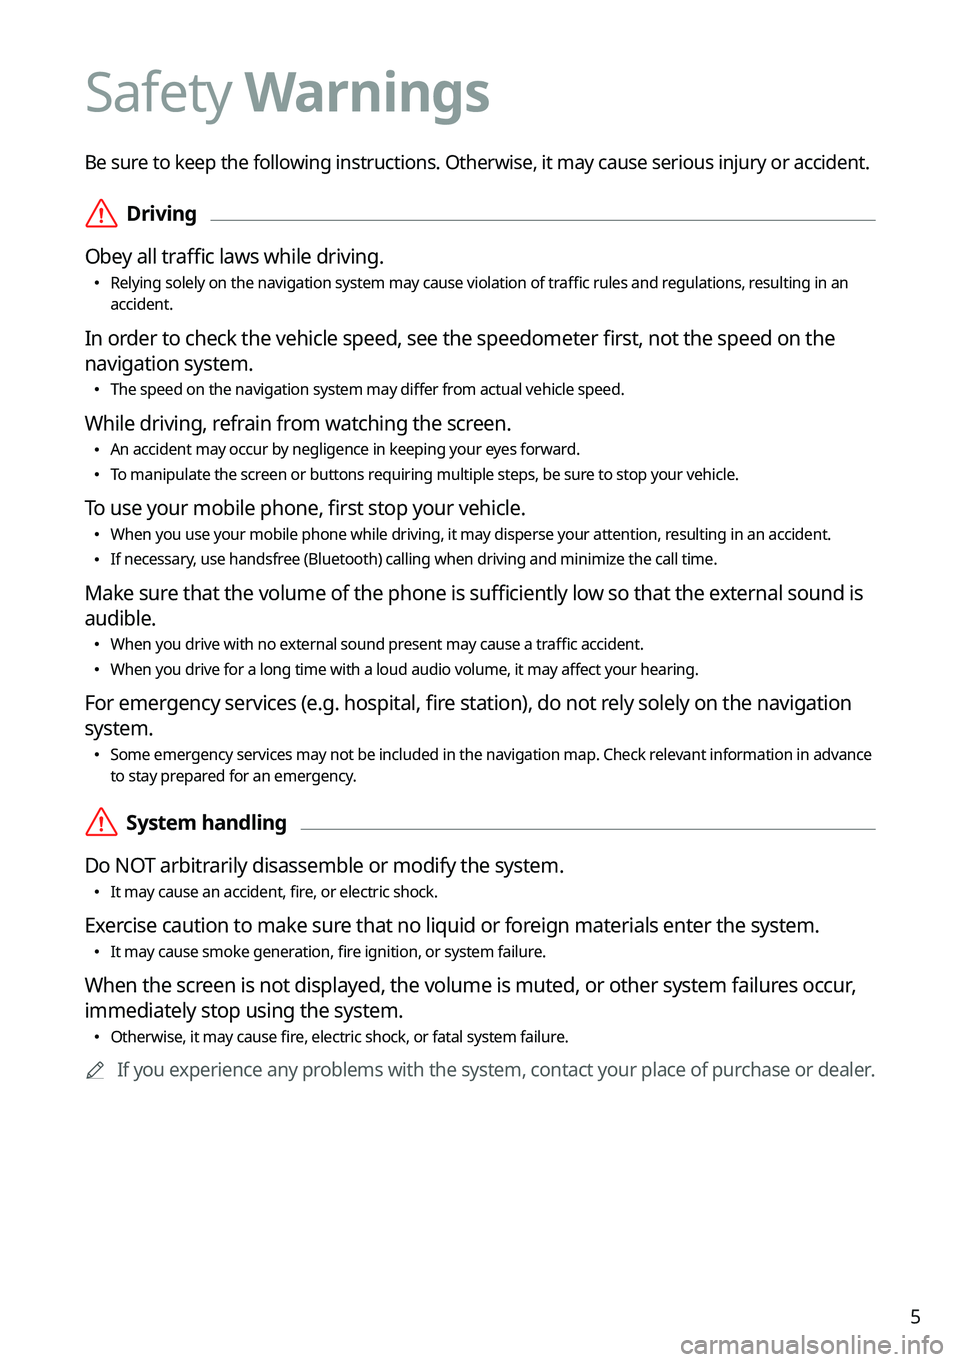 KIA FORTE 2023  Navigation System Quick Reference Guide 5
Be sure to keep the following instructions. Otherwise, it may cause serious injury or accident.
 ÝDriving
Obey all traffic laws while driving.
 • Relying solely on the navigation system may cause